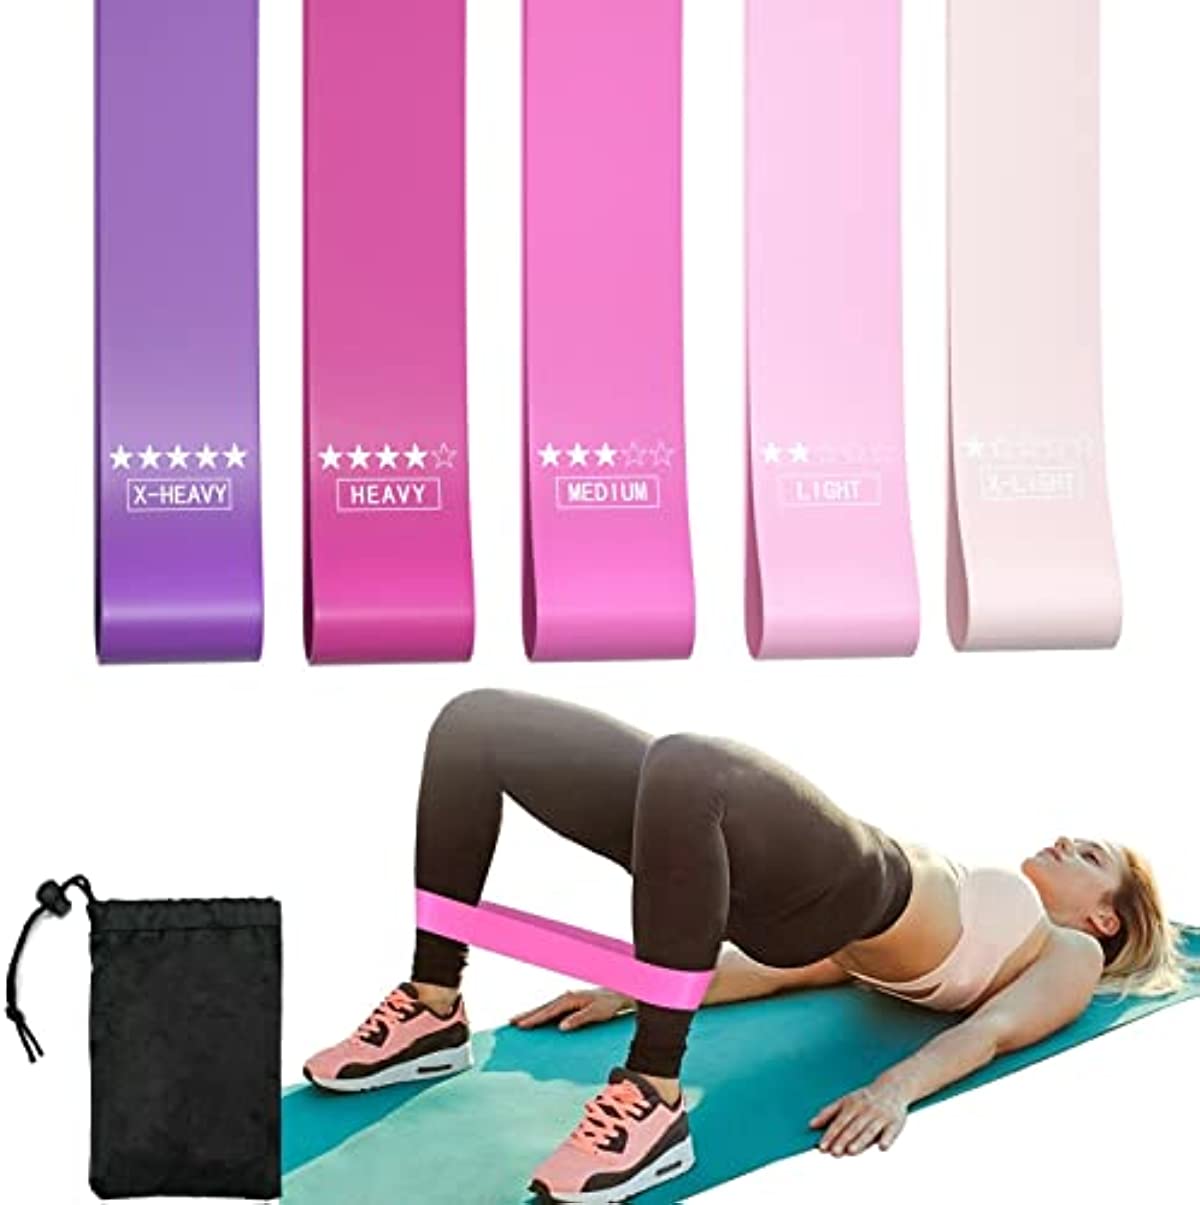 Resistance Band, Workout Equipment Work from Home, Exercise Equipment for Squat, Leg, Glute, Thigh, Fitness and Home Workout, Non Slip Booty Bands for Women, Gym Accessories for Yoga